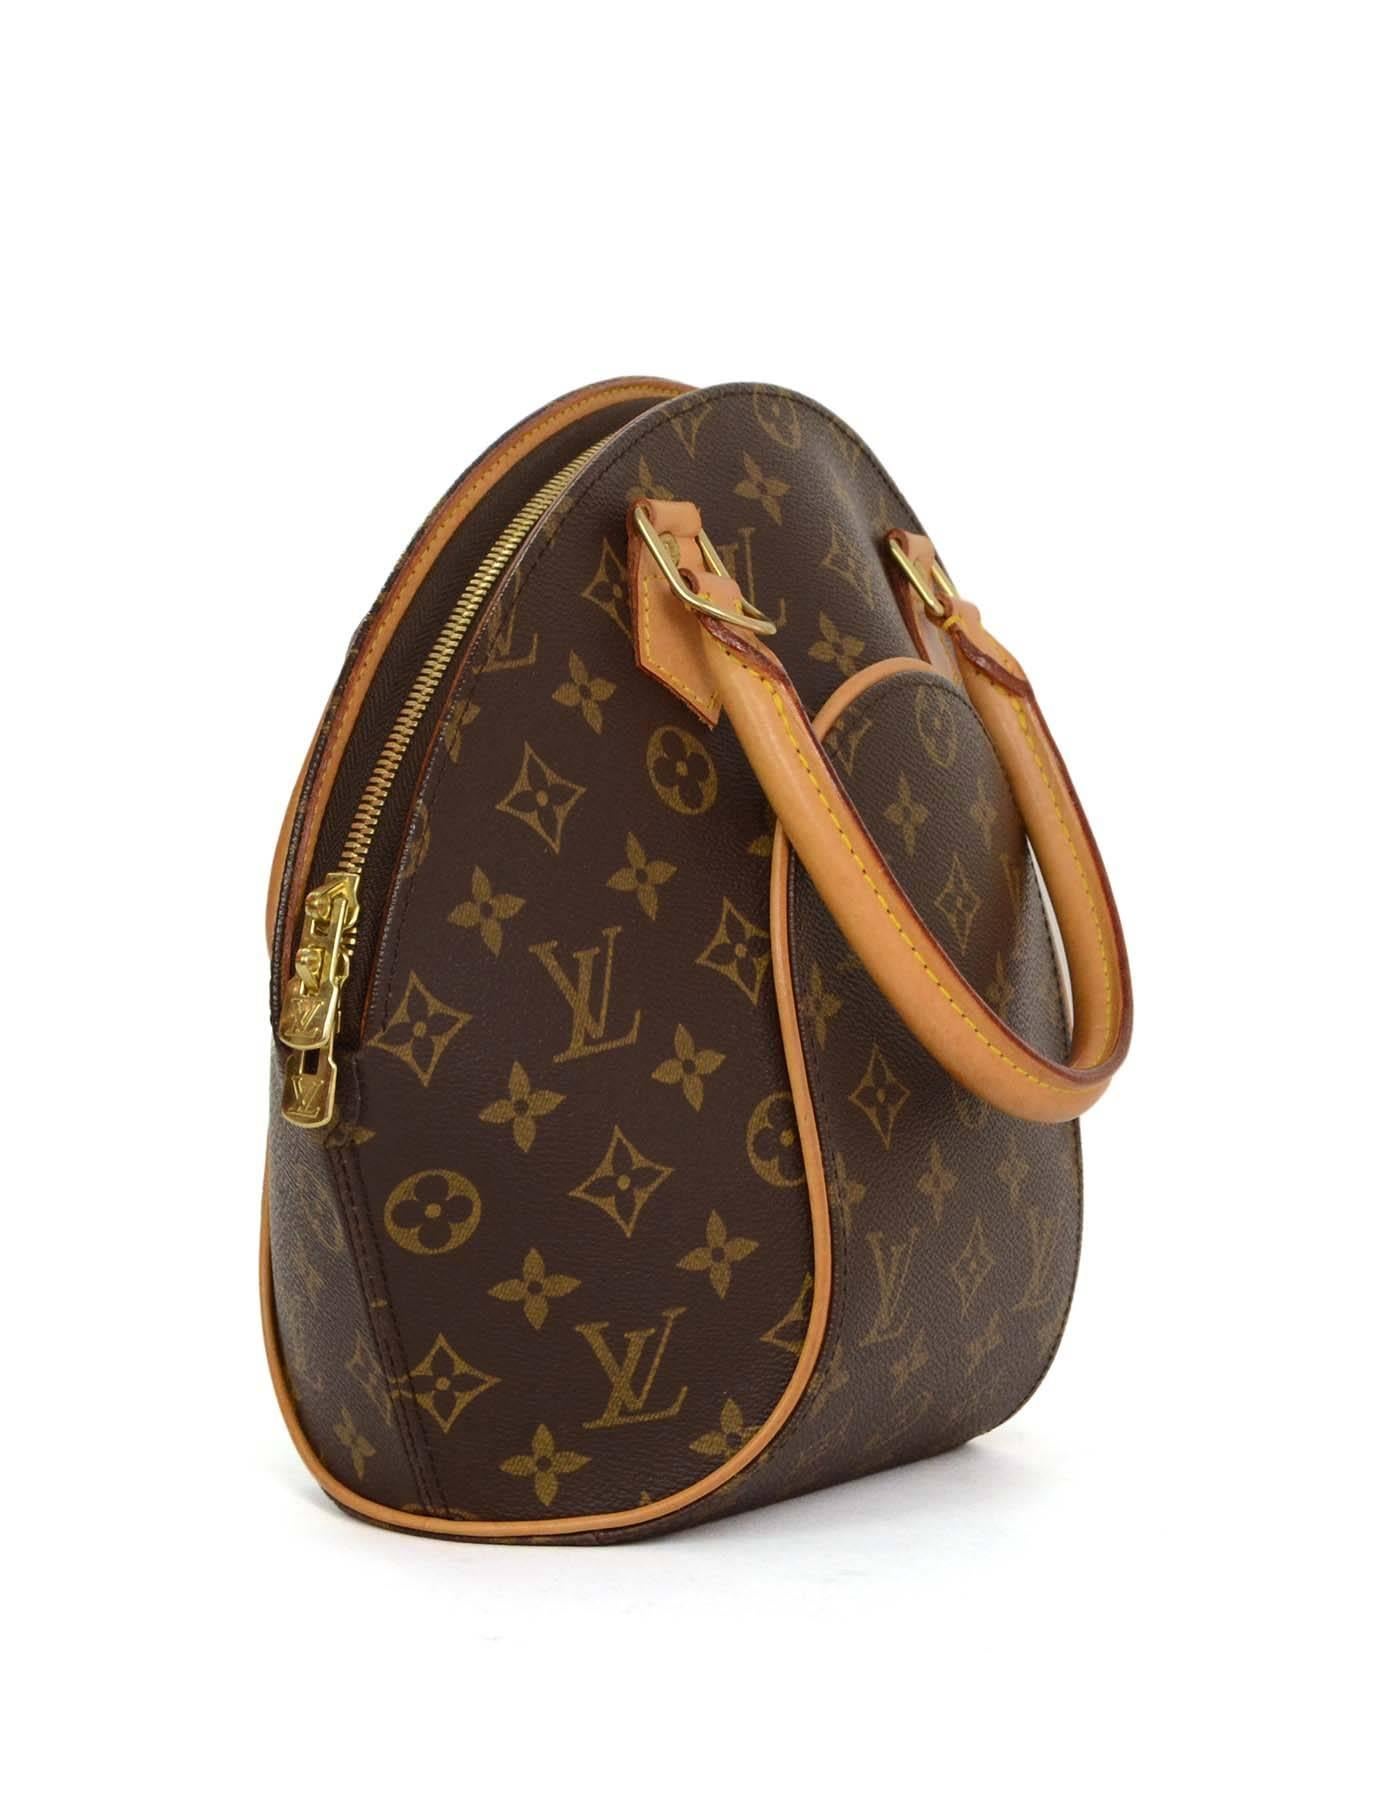 Louis Vuitton Monogram Ellipse PM Bag 
Features leather rolled handles and leather piping throughout
Made In: U.S.A.
Year of Production: 2003
Color: Brown and tan
Hardware: Goldtone
Materials: Leather and coated canvas
Lining: Brown